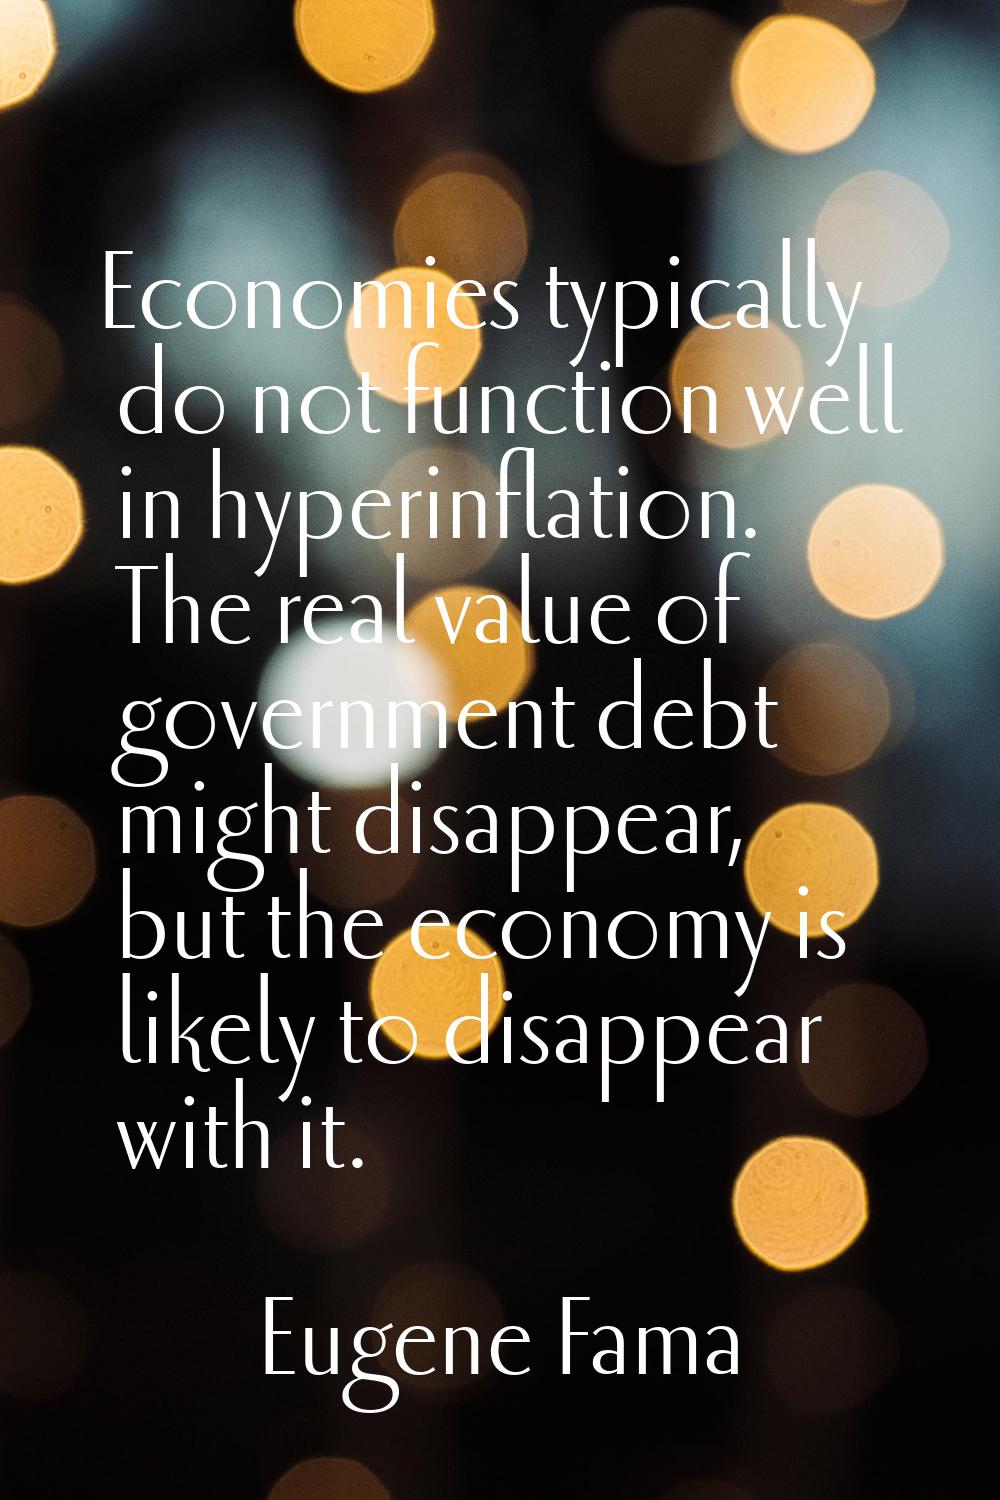 Economies typically do not function well in hyperinflation. The real value of government debt might